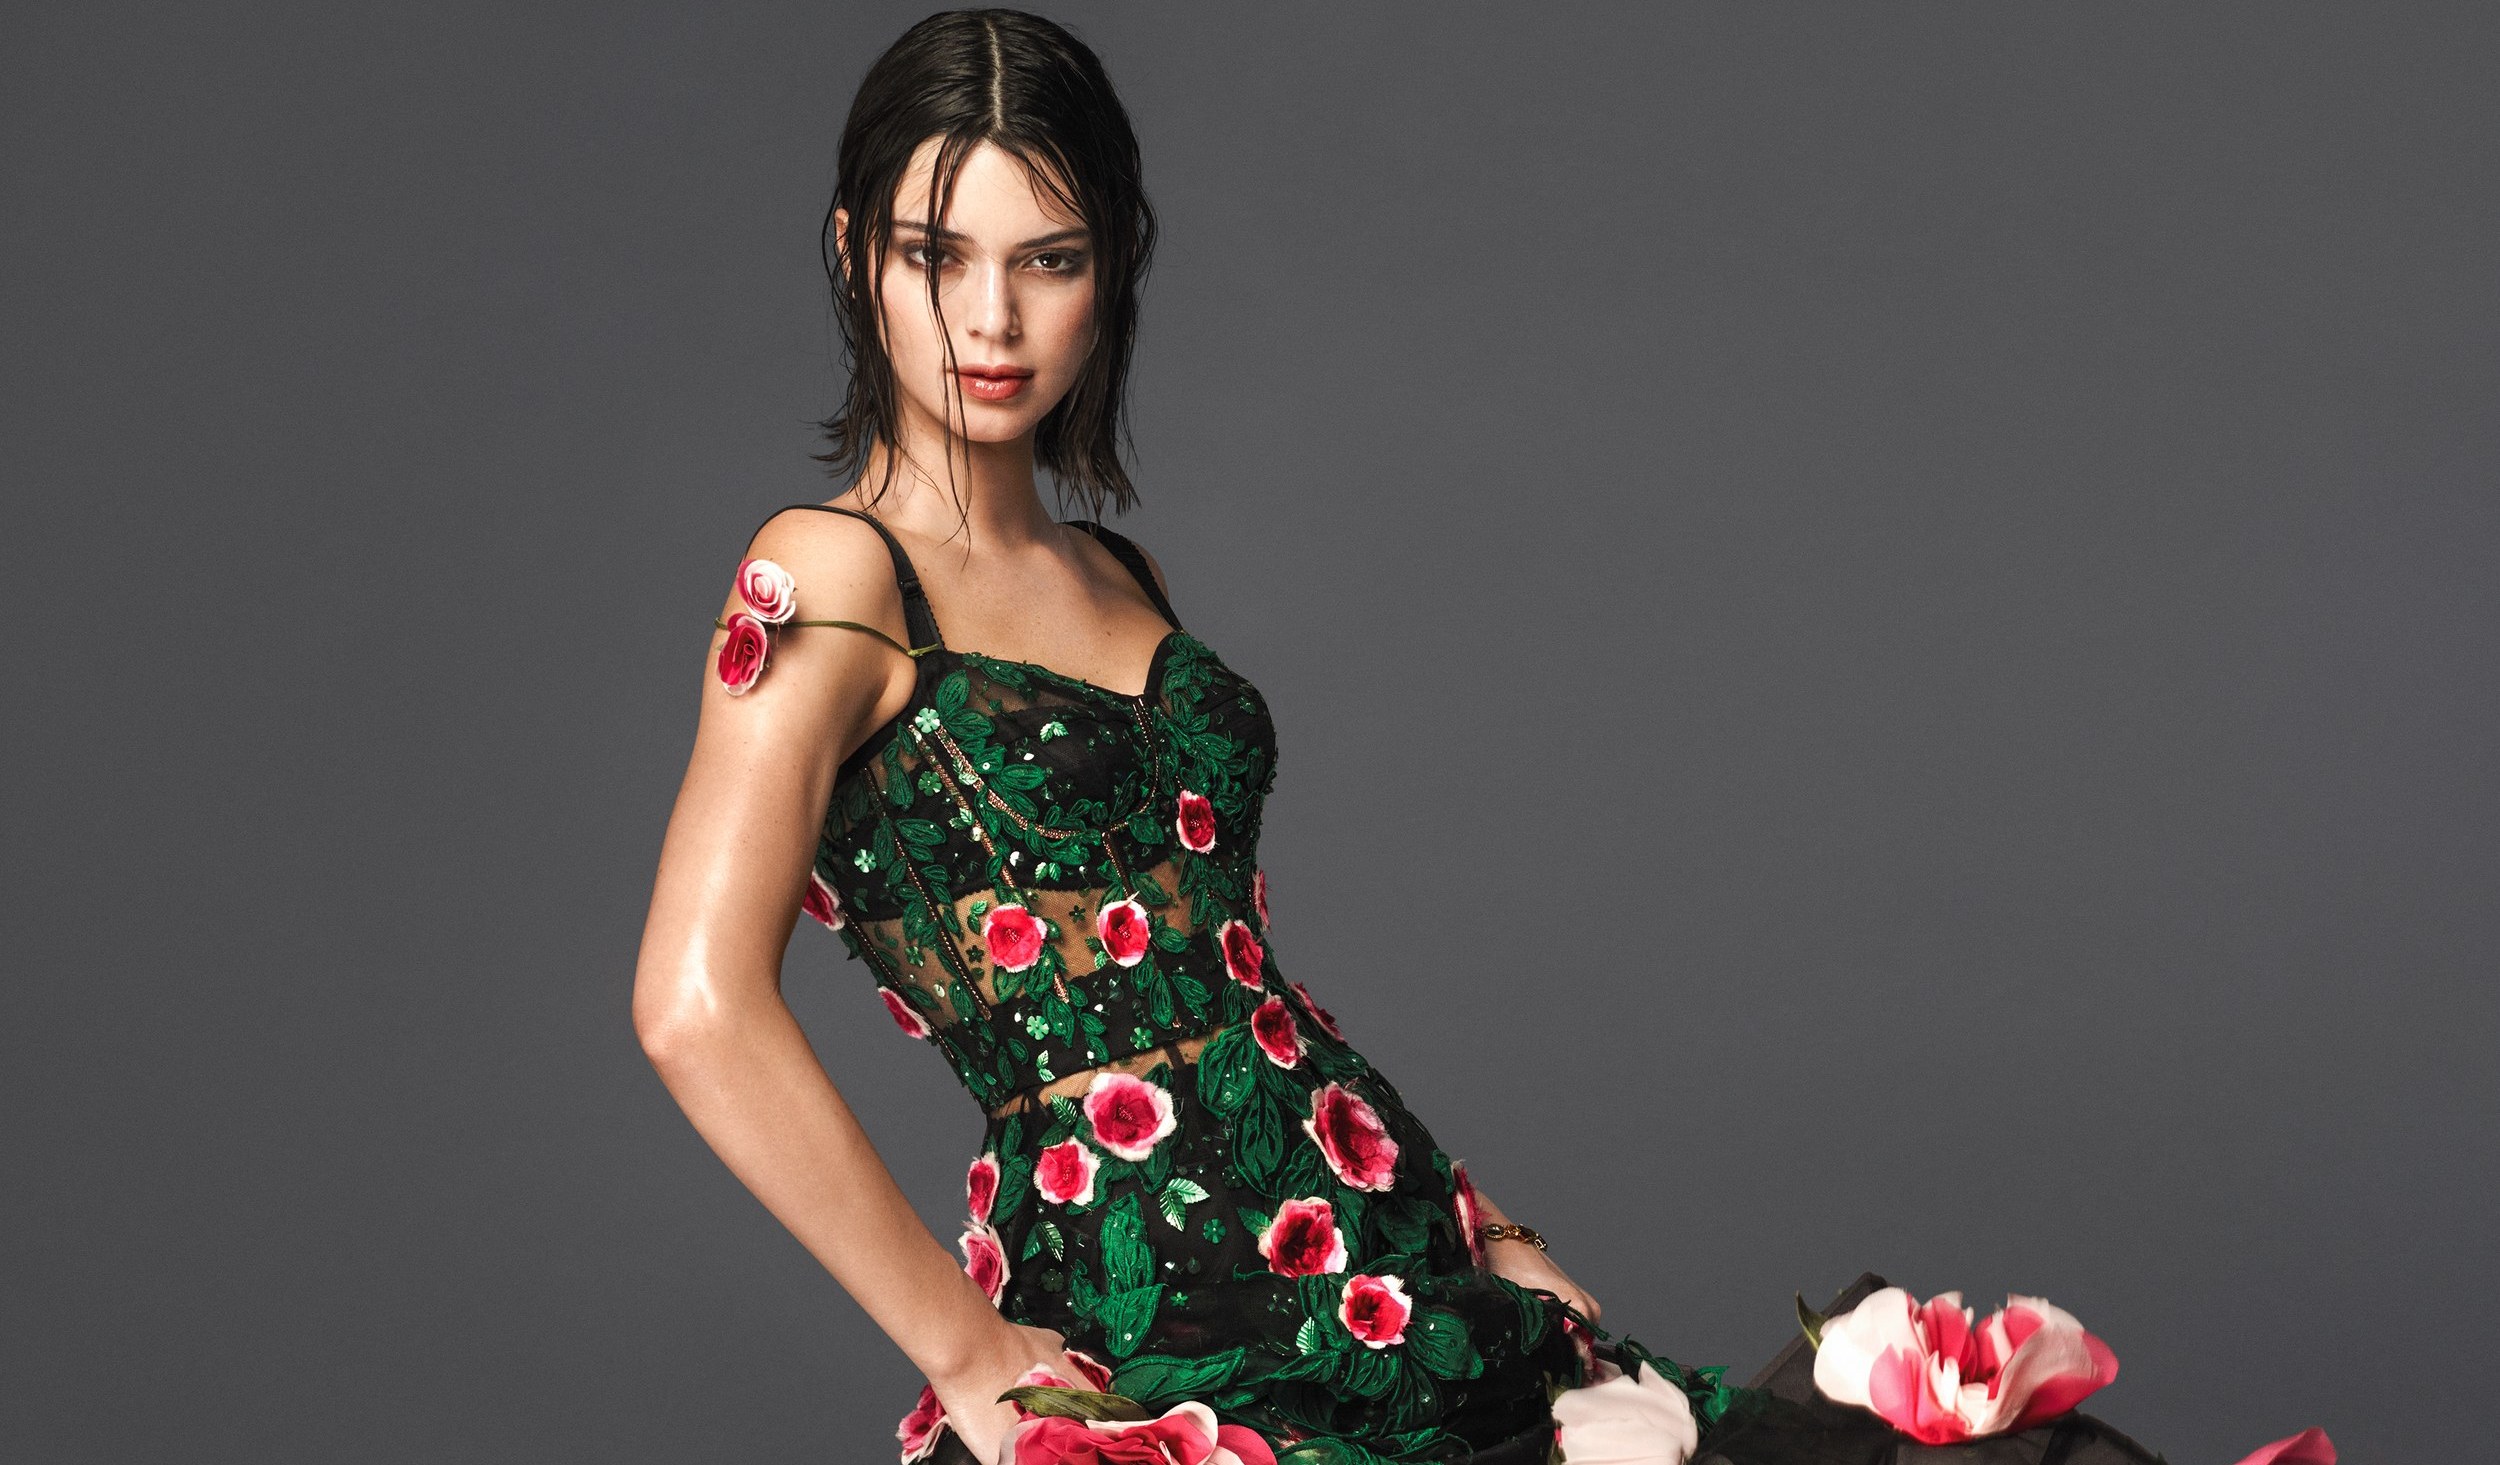 240x4000 Resolution Kendall Jenner For Vogue US 2018 240x4000 ...